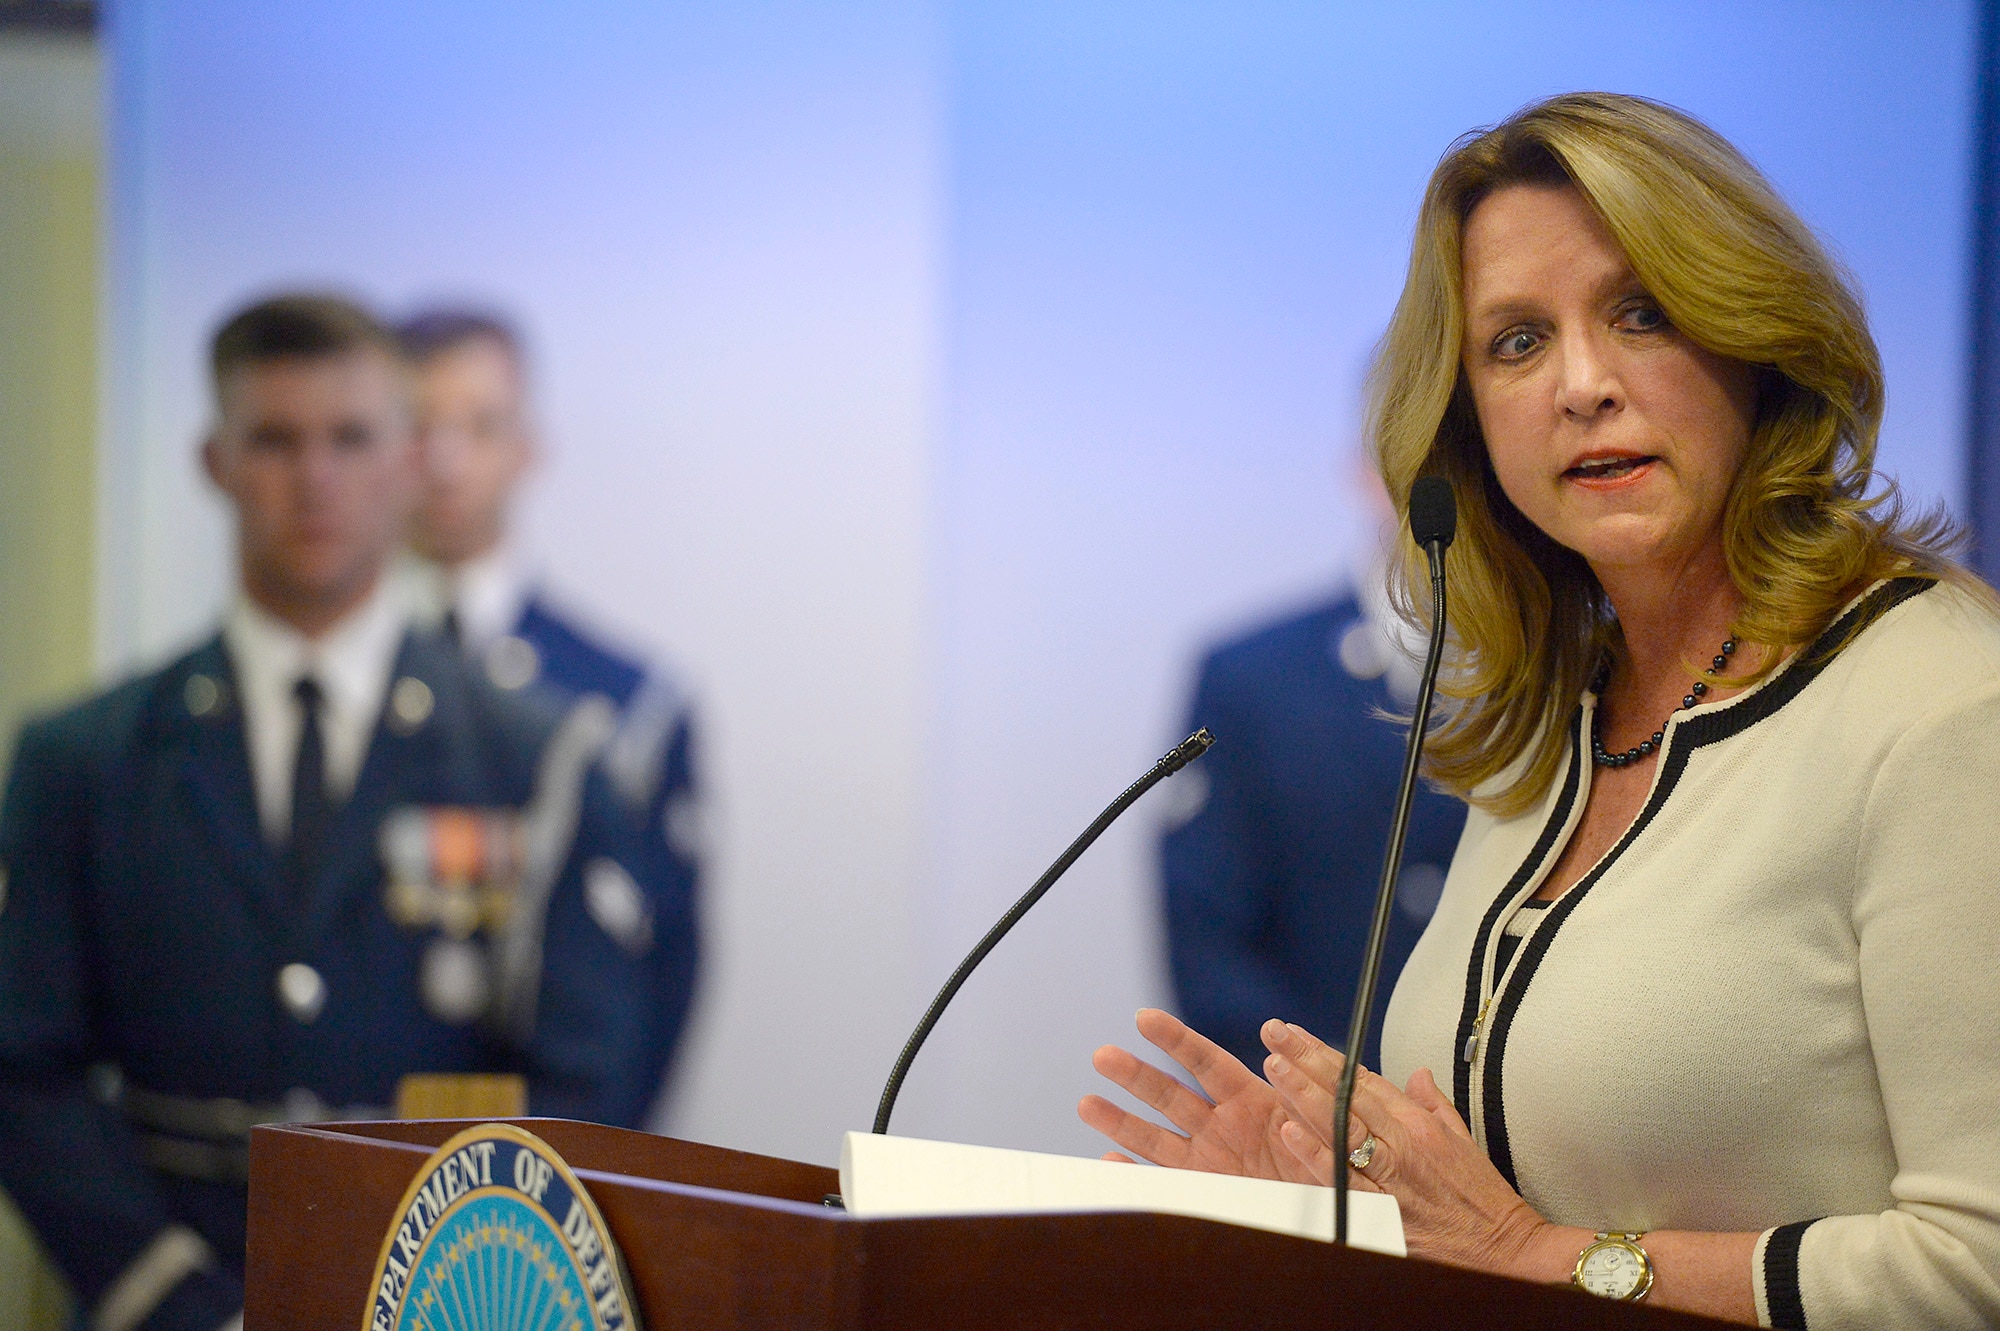 Secretary of the Air Force Deborah Lee James speaks during Anthony Duno’s retirement ceremony at the Pentagon in Washington, D.C., July 22, 2016. Duno leaves federal service after 70 years, beginning with being drafted into the Army in 1943. Duno accepted his first civil service position as an administrative and logistical officer in the Army Exchange Service in 1947.  (U.S. Air Force photo/Scott M. Ash)